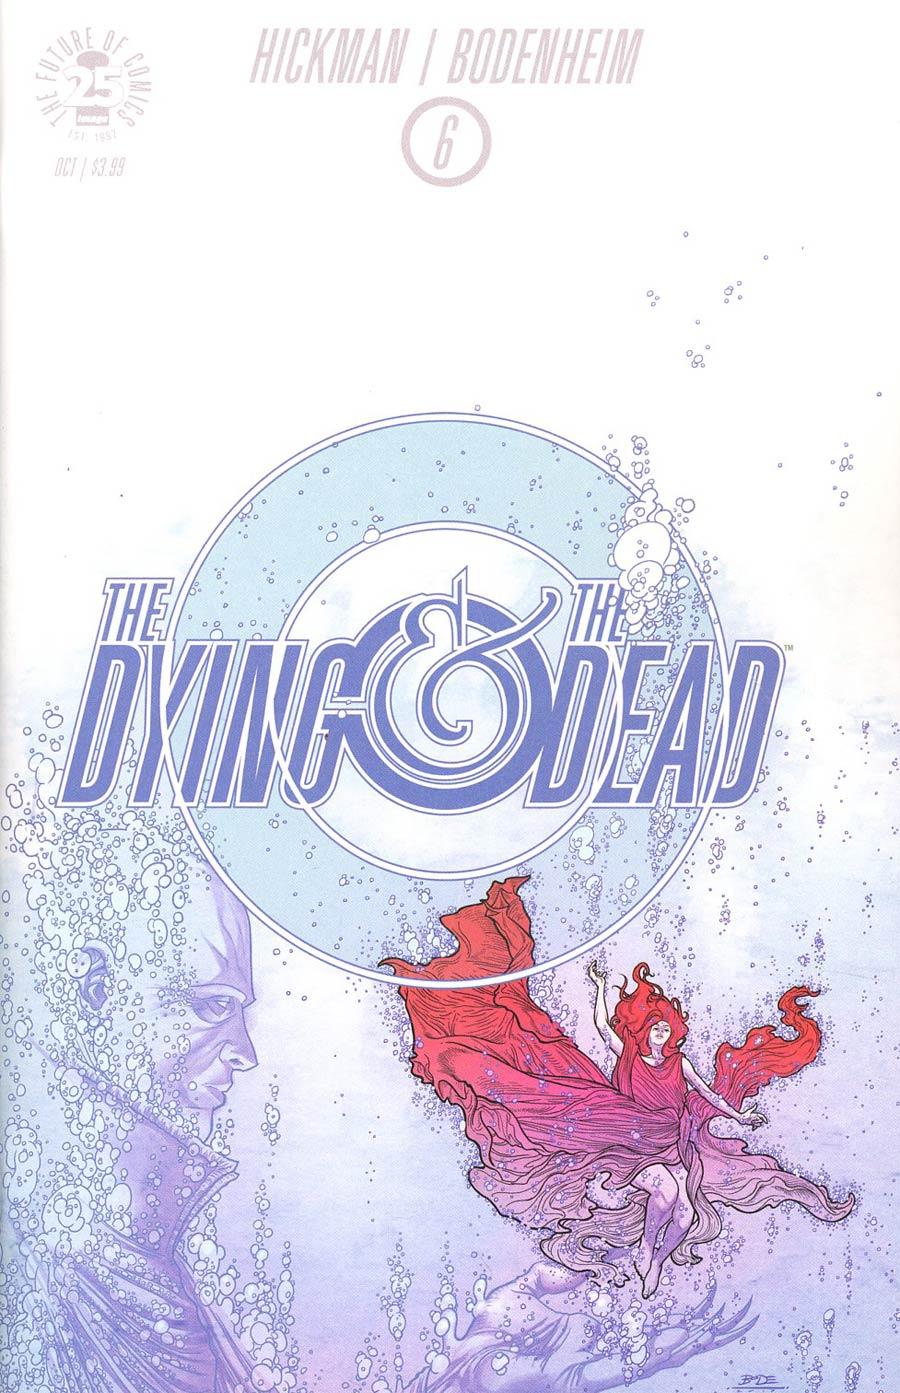 Dying And The Dead Vol. 1 #6